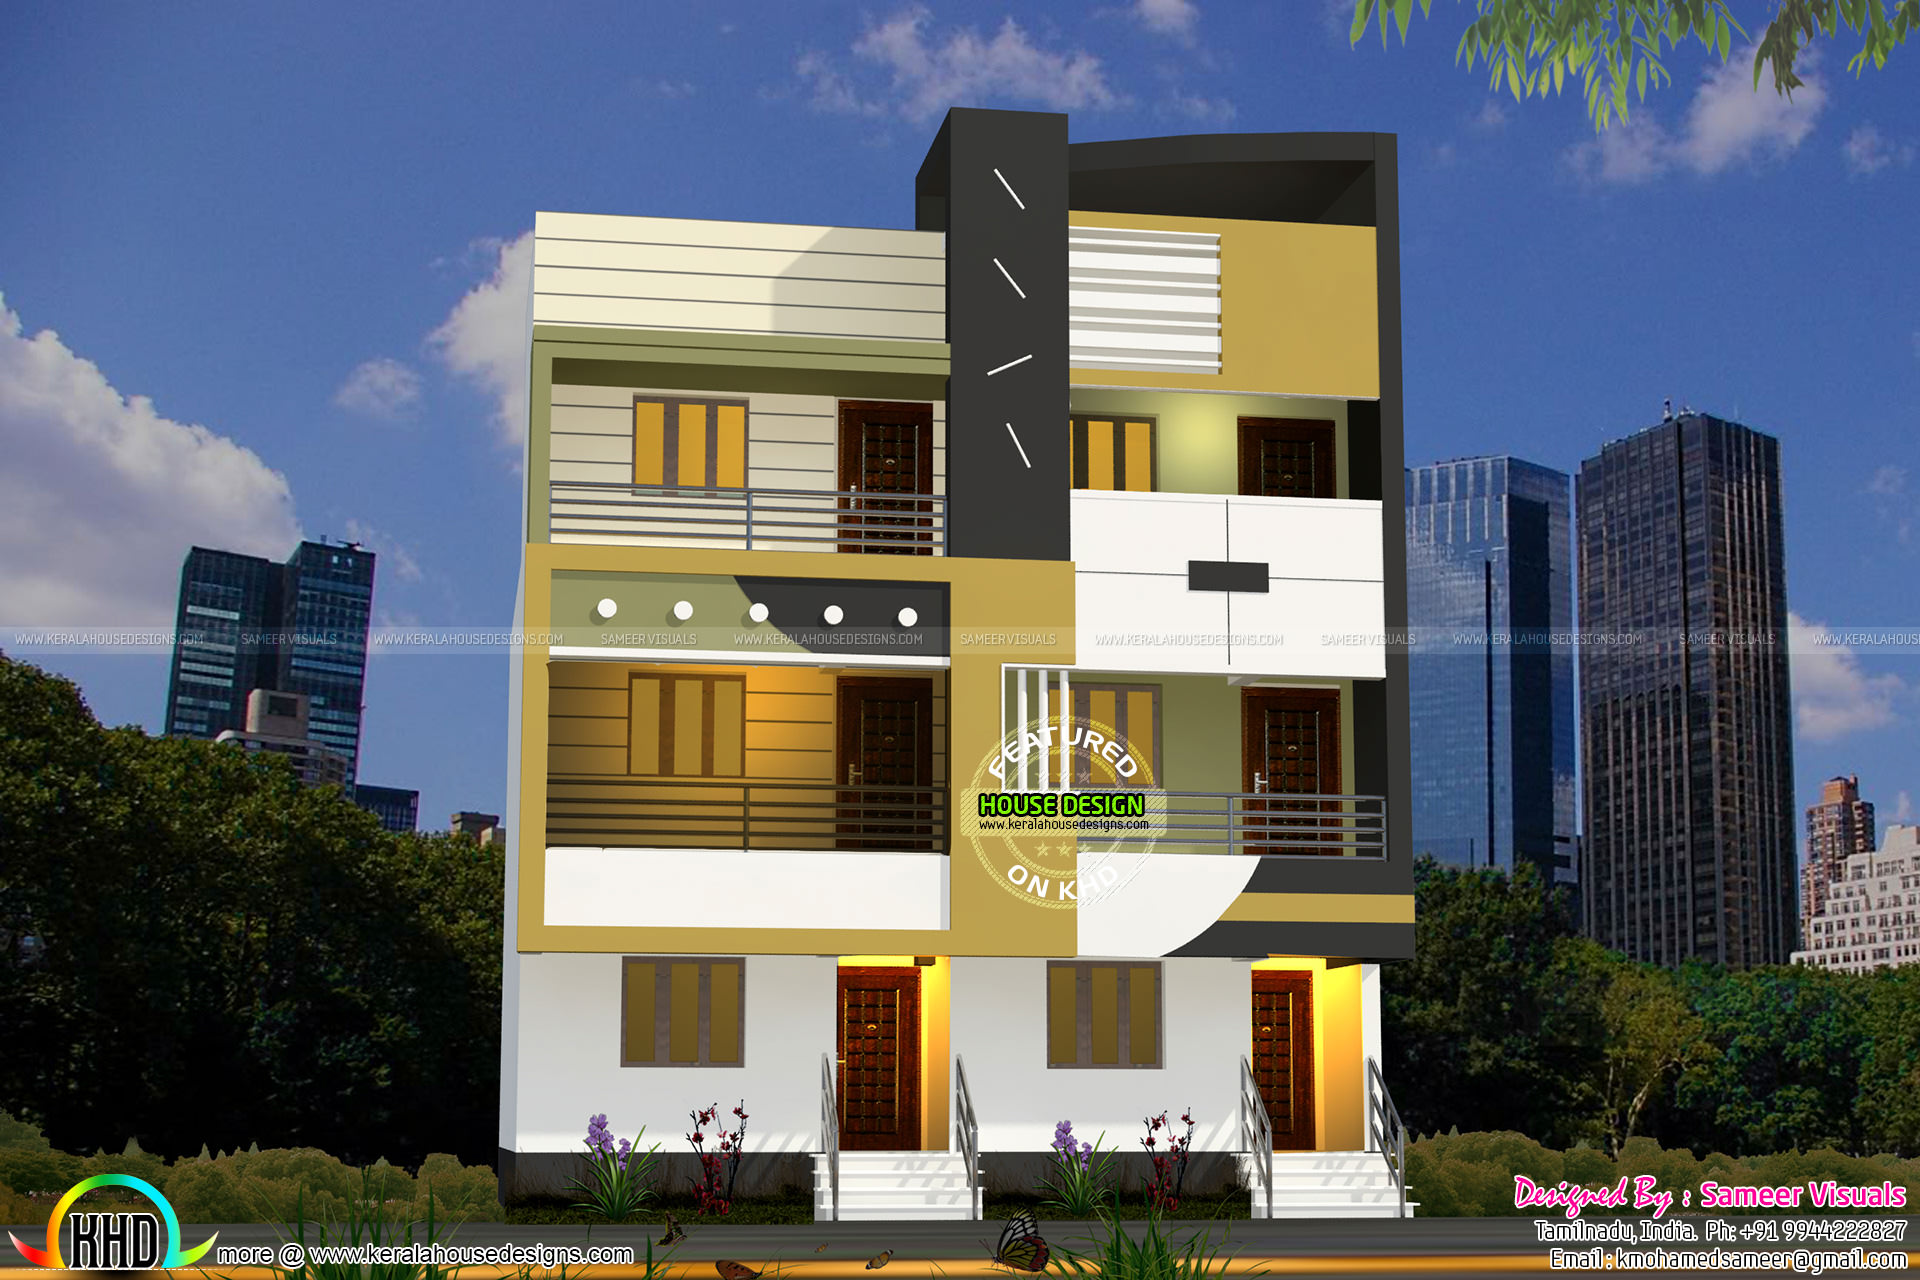 Twin house architecture Sameer - Kerala home design and floor plans